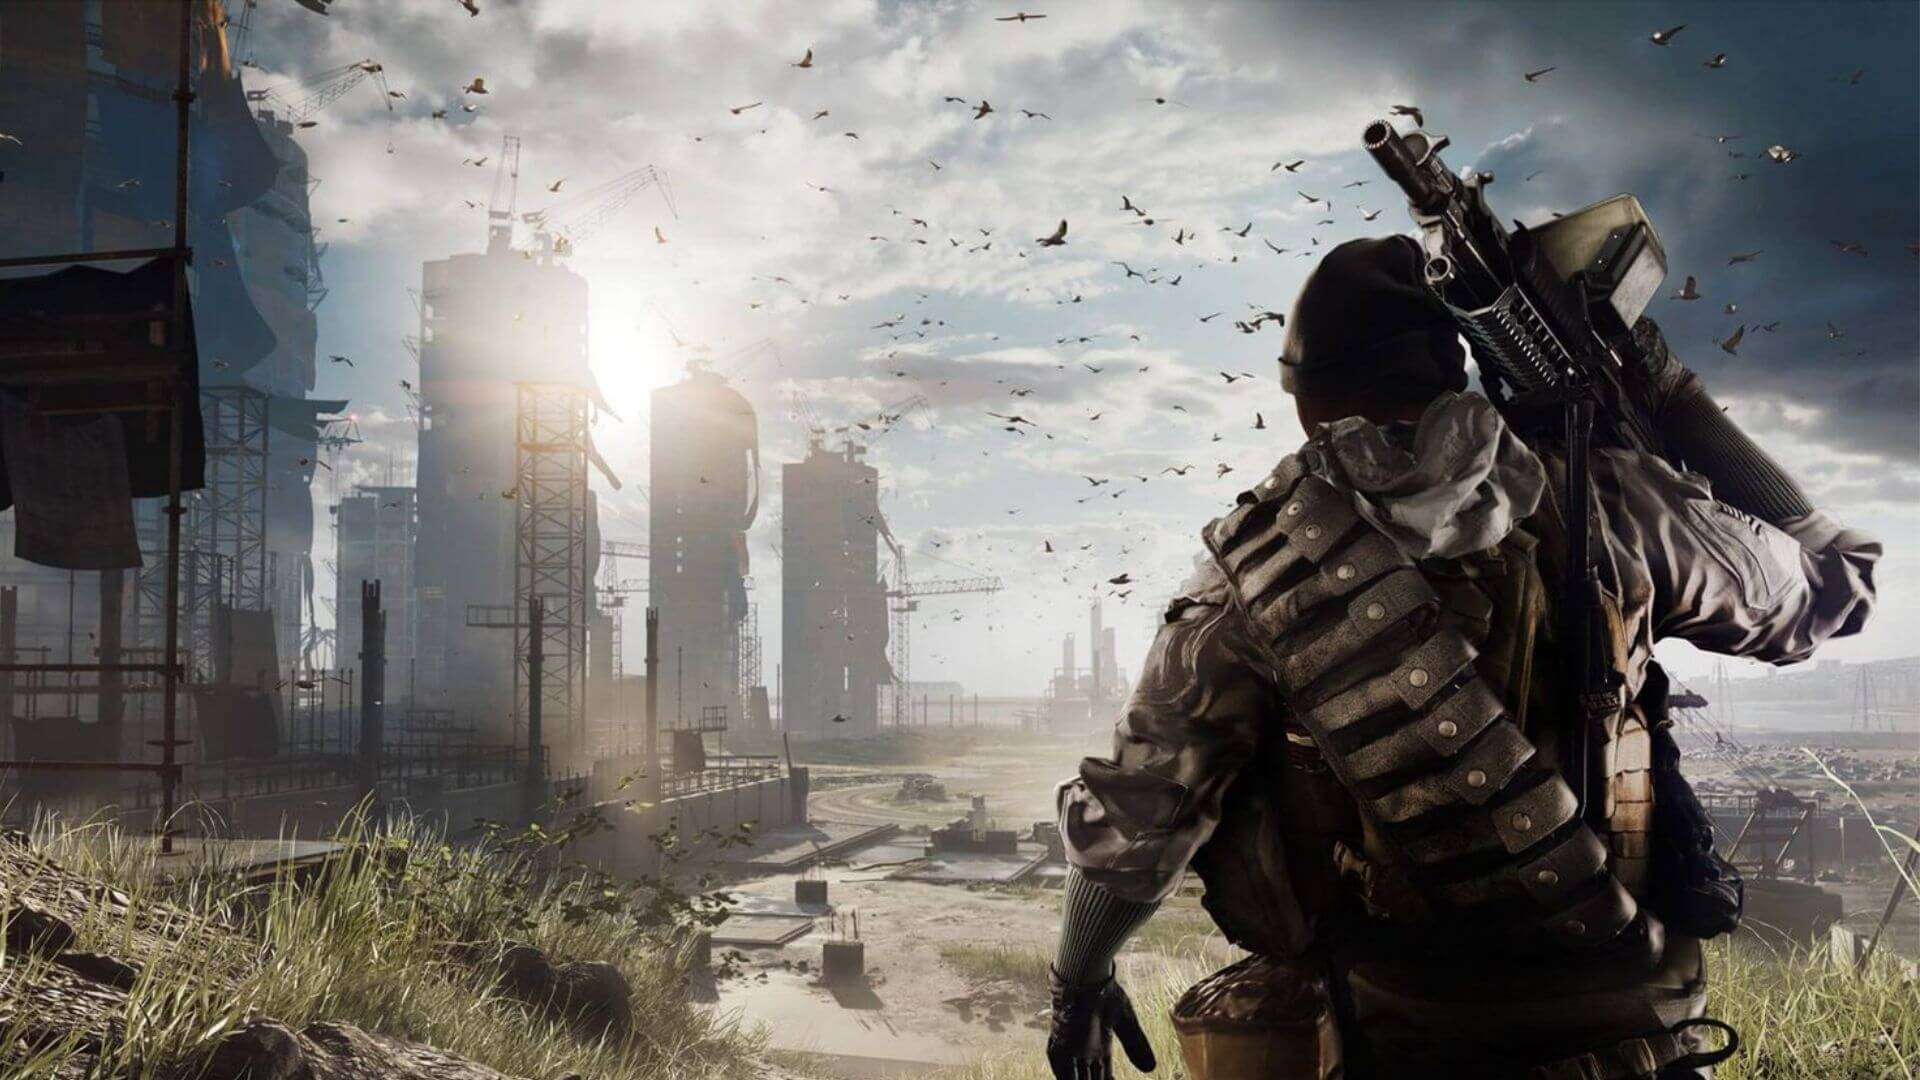 Battlefield player looking at city